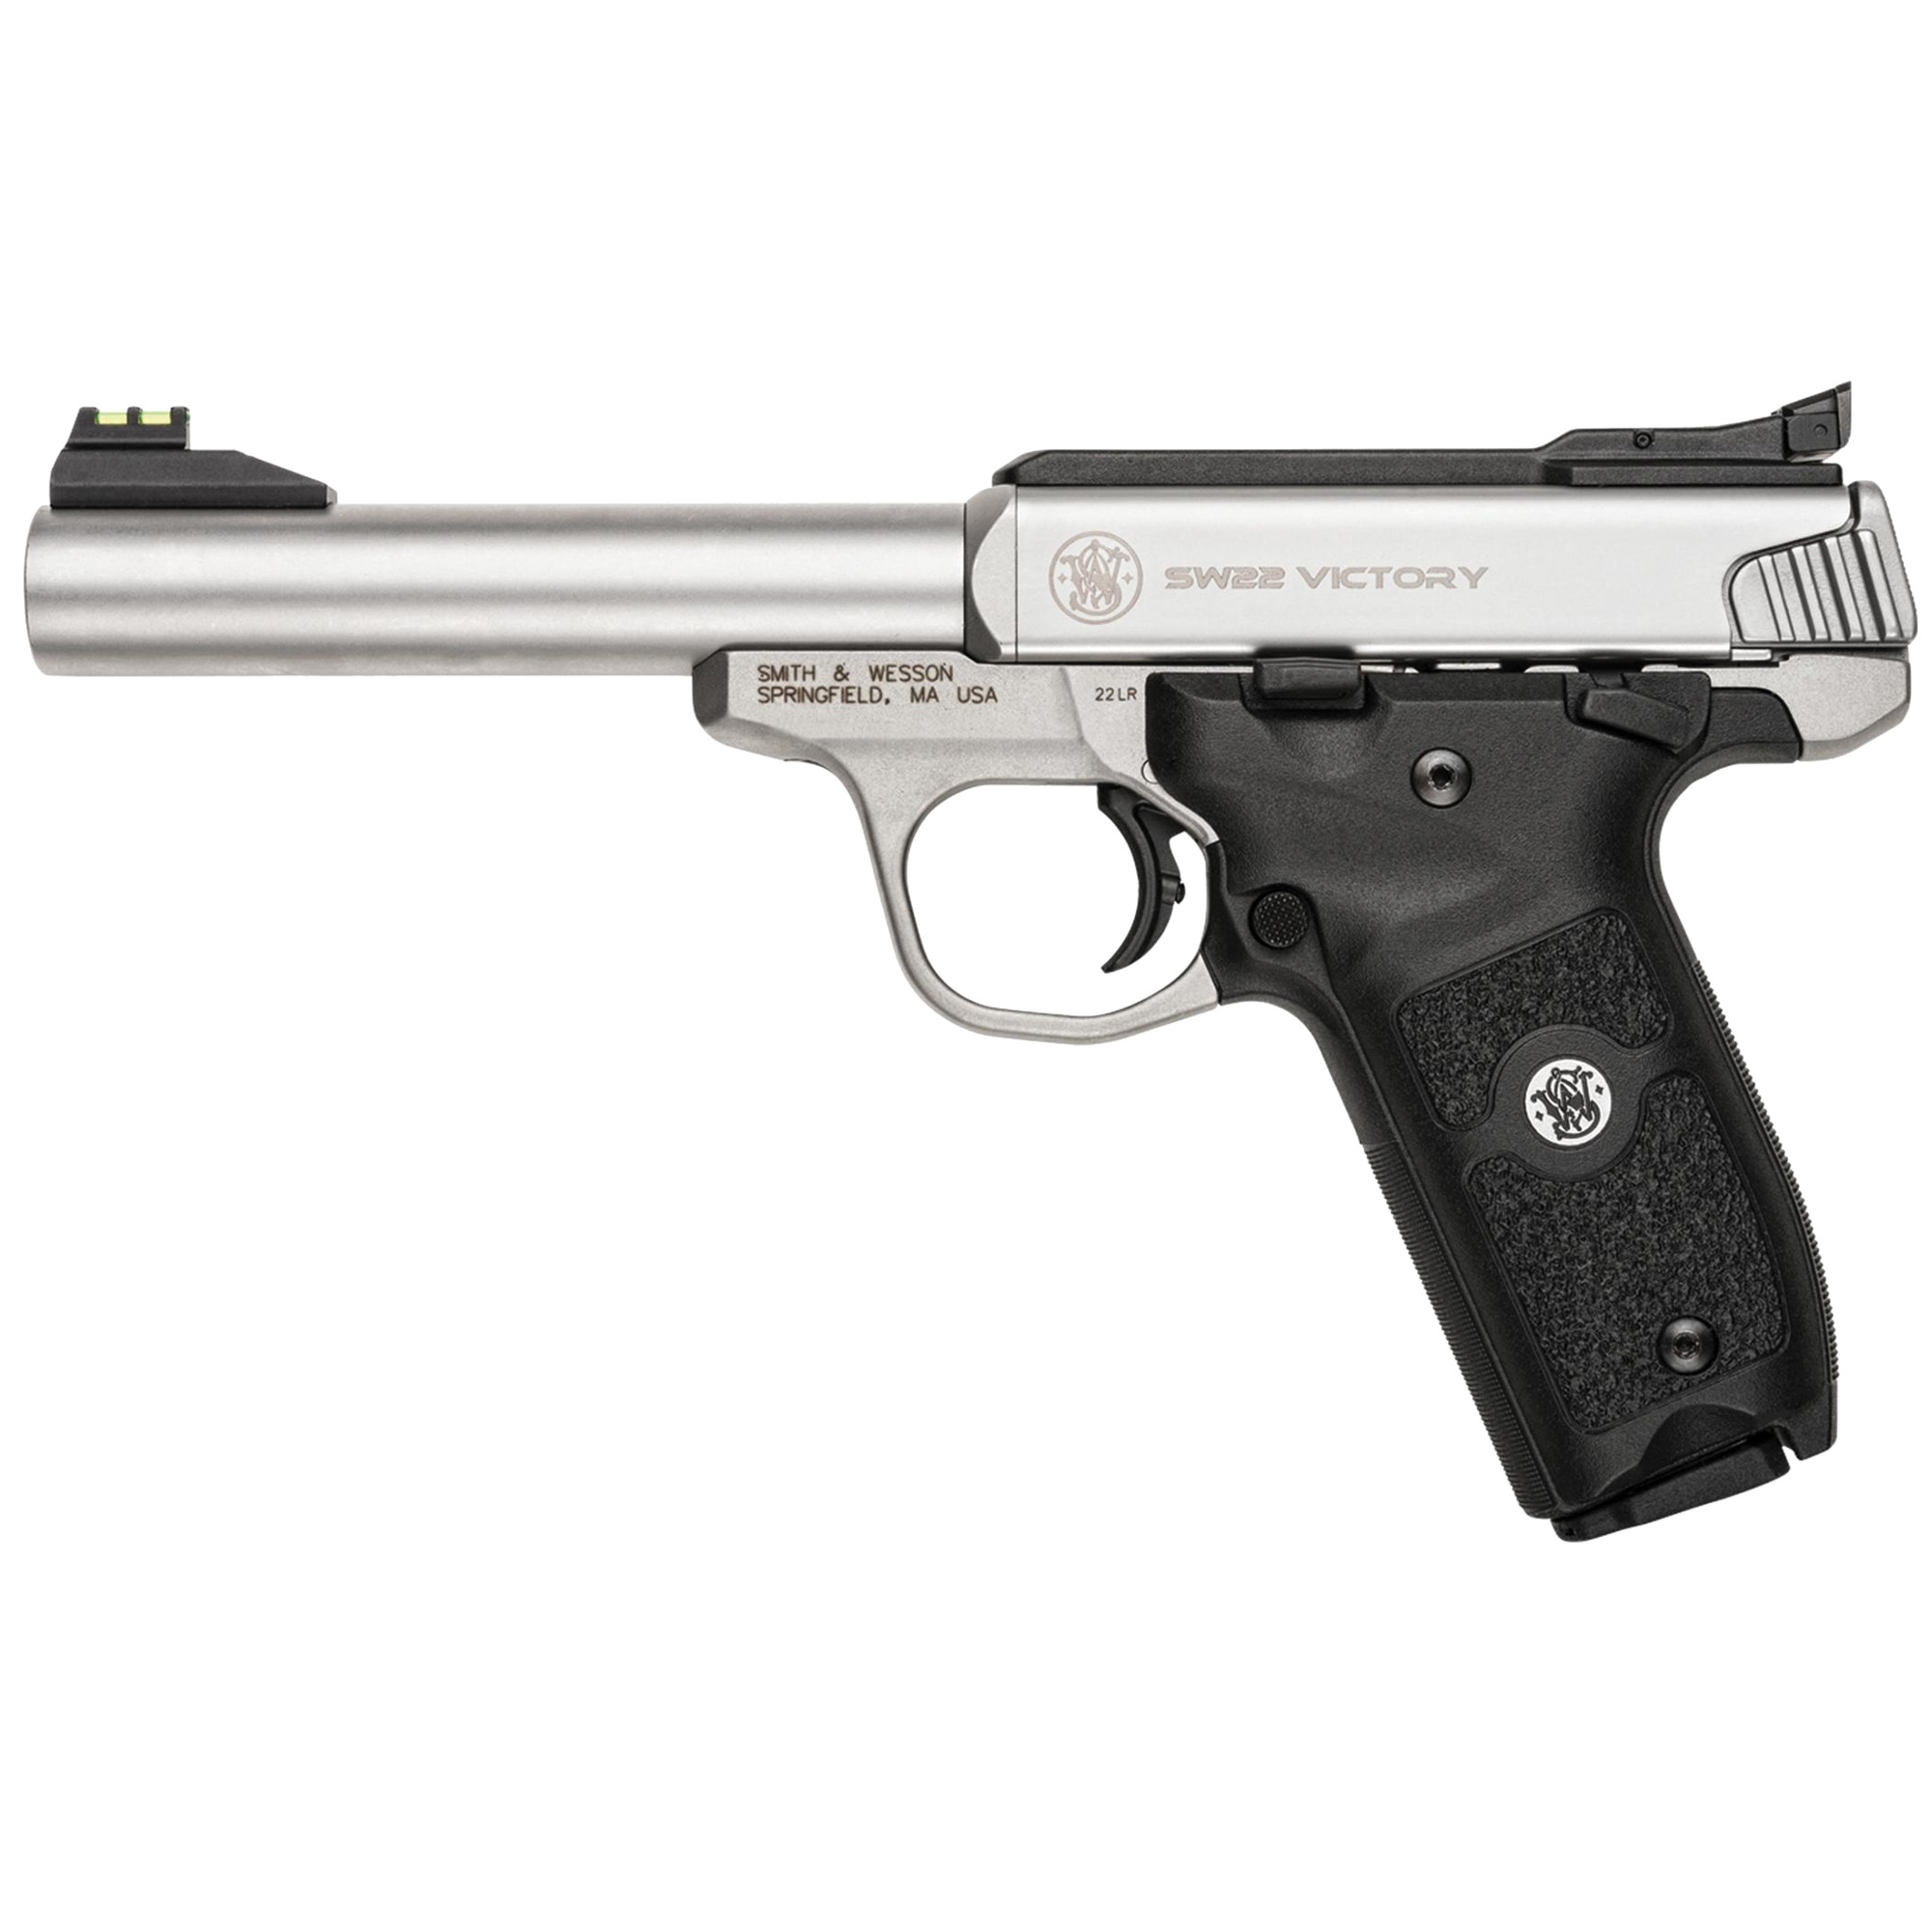 Smith & Wesson 108490 SW22 Victory 22 LR 5.50